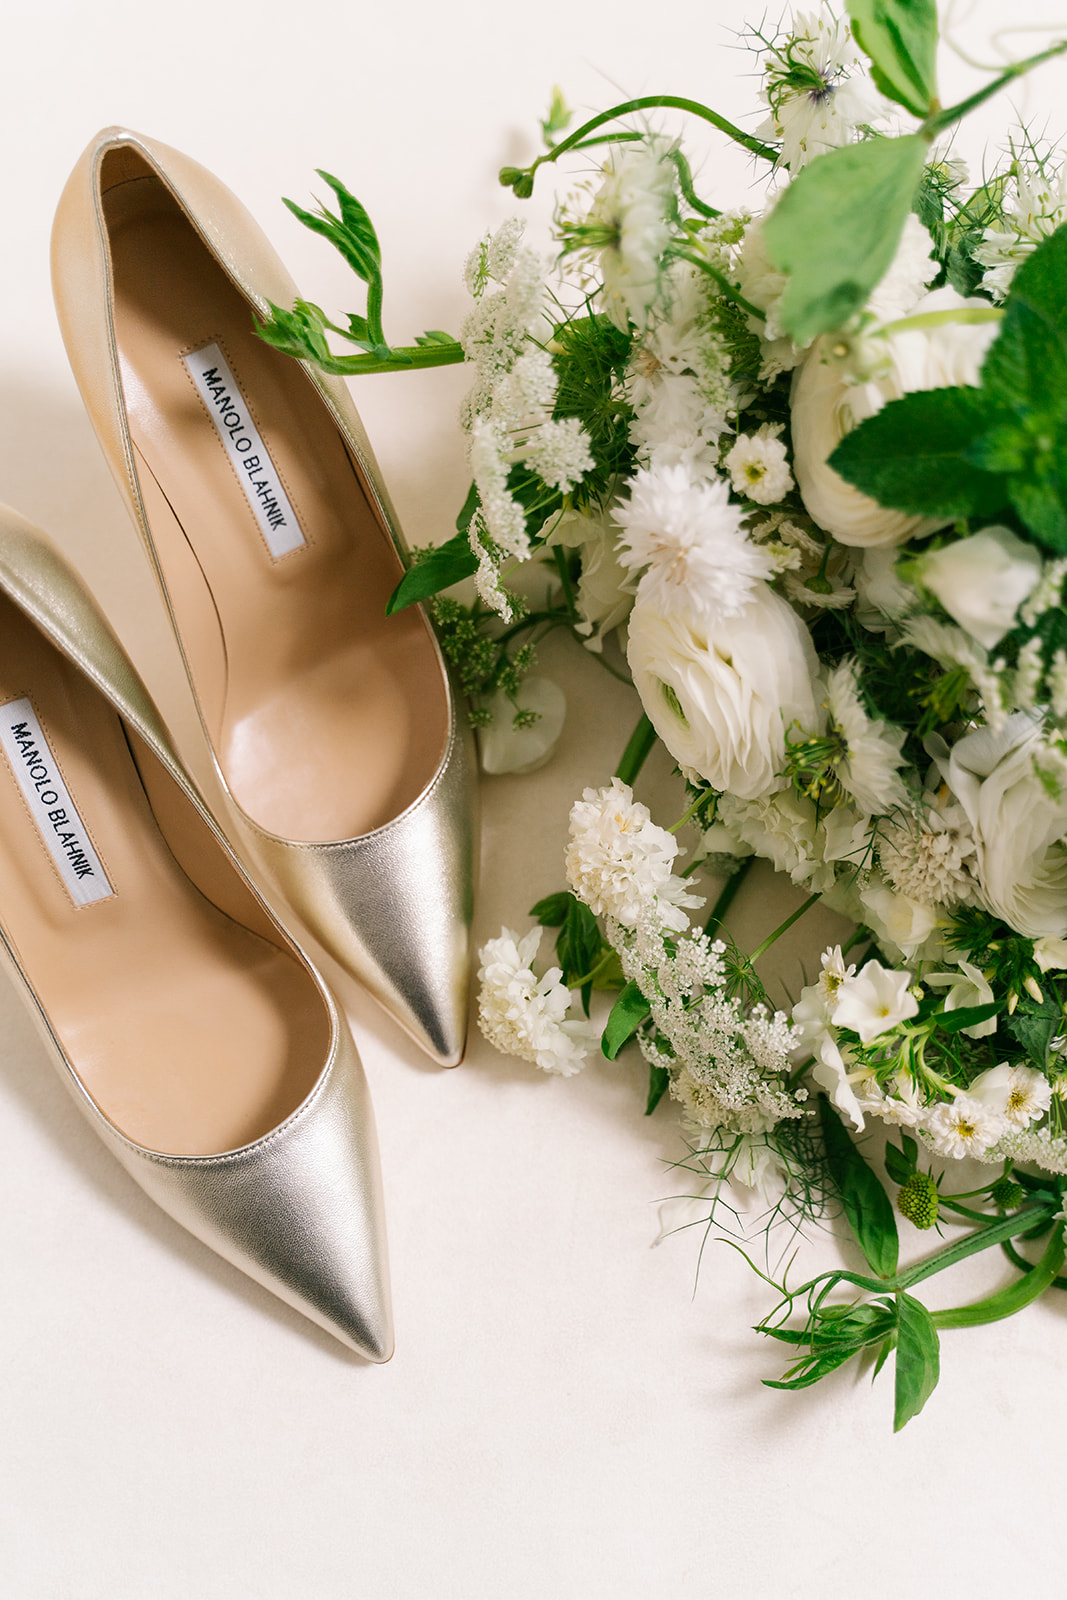 Manolo wedding heels and bouquet